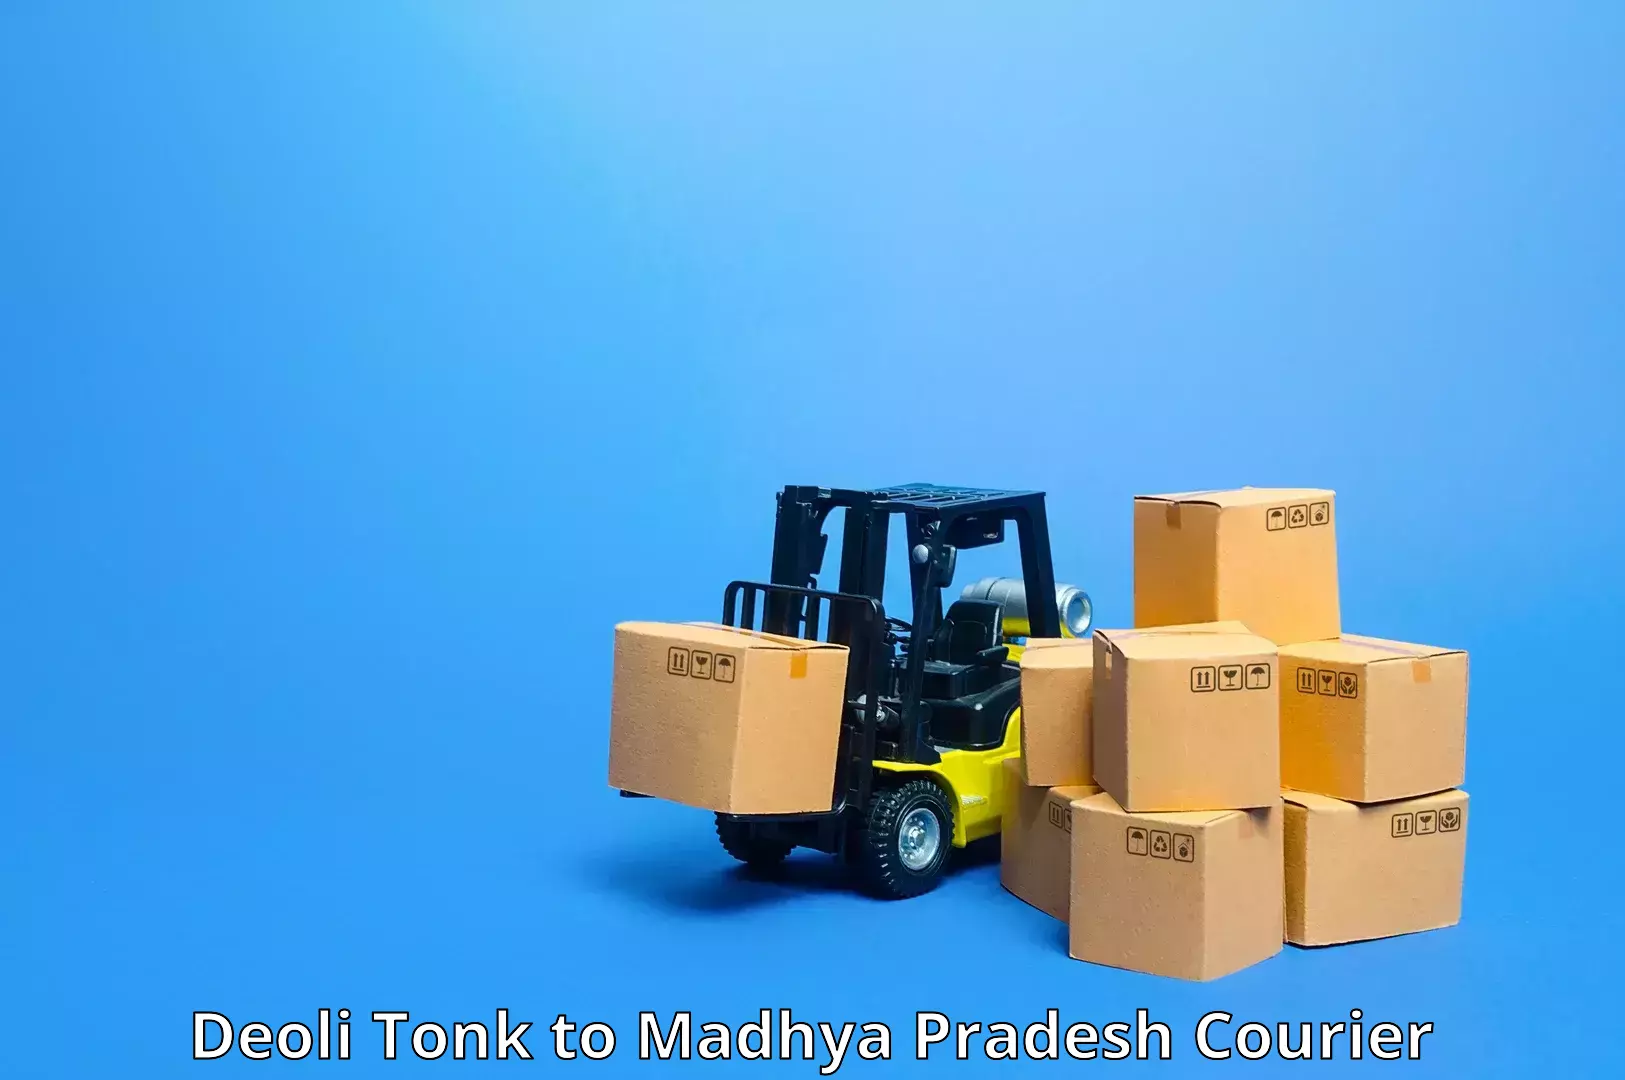 Express package services Deoli Tonk to Madhya Pradesh